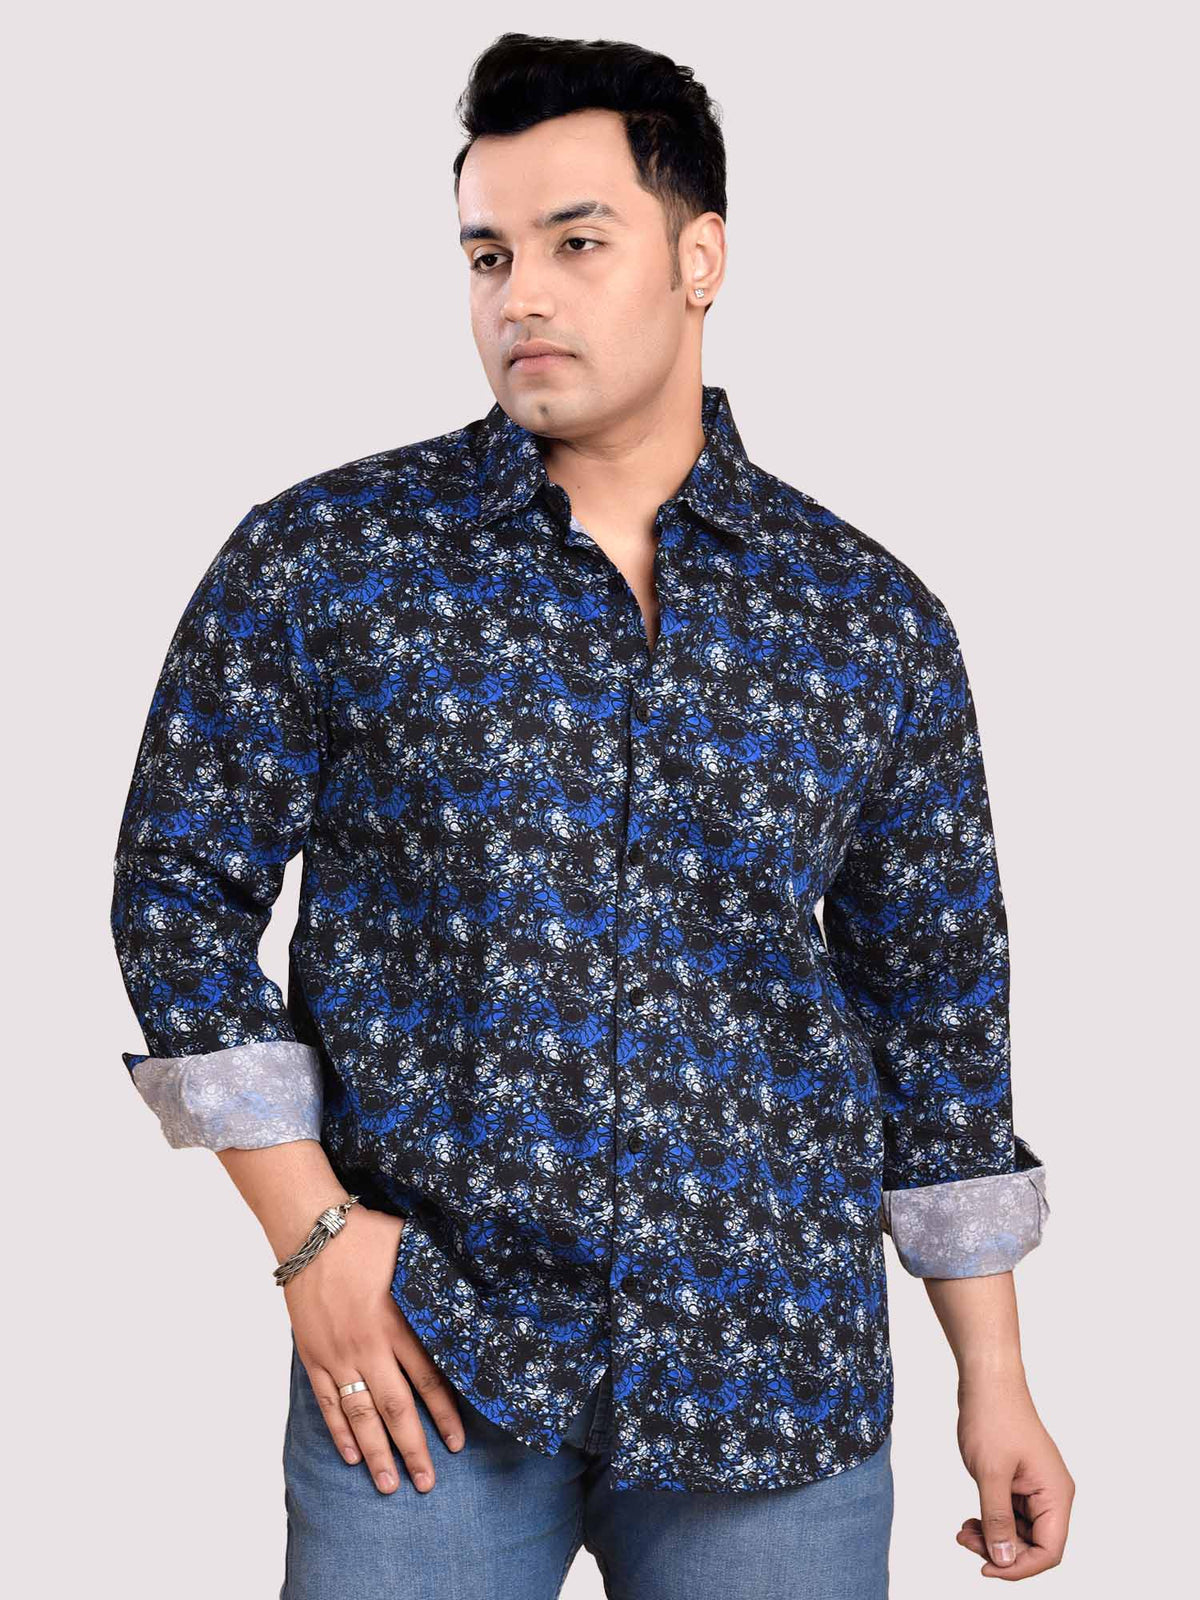 Electric Printed Cotton Full sleeve Men's Plus size